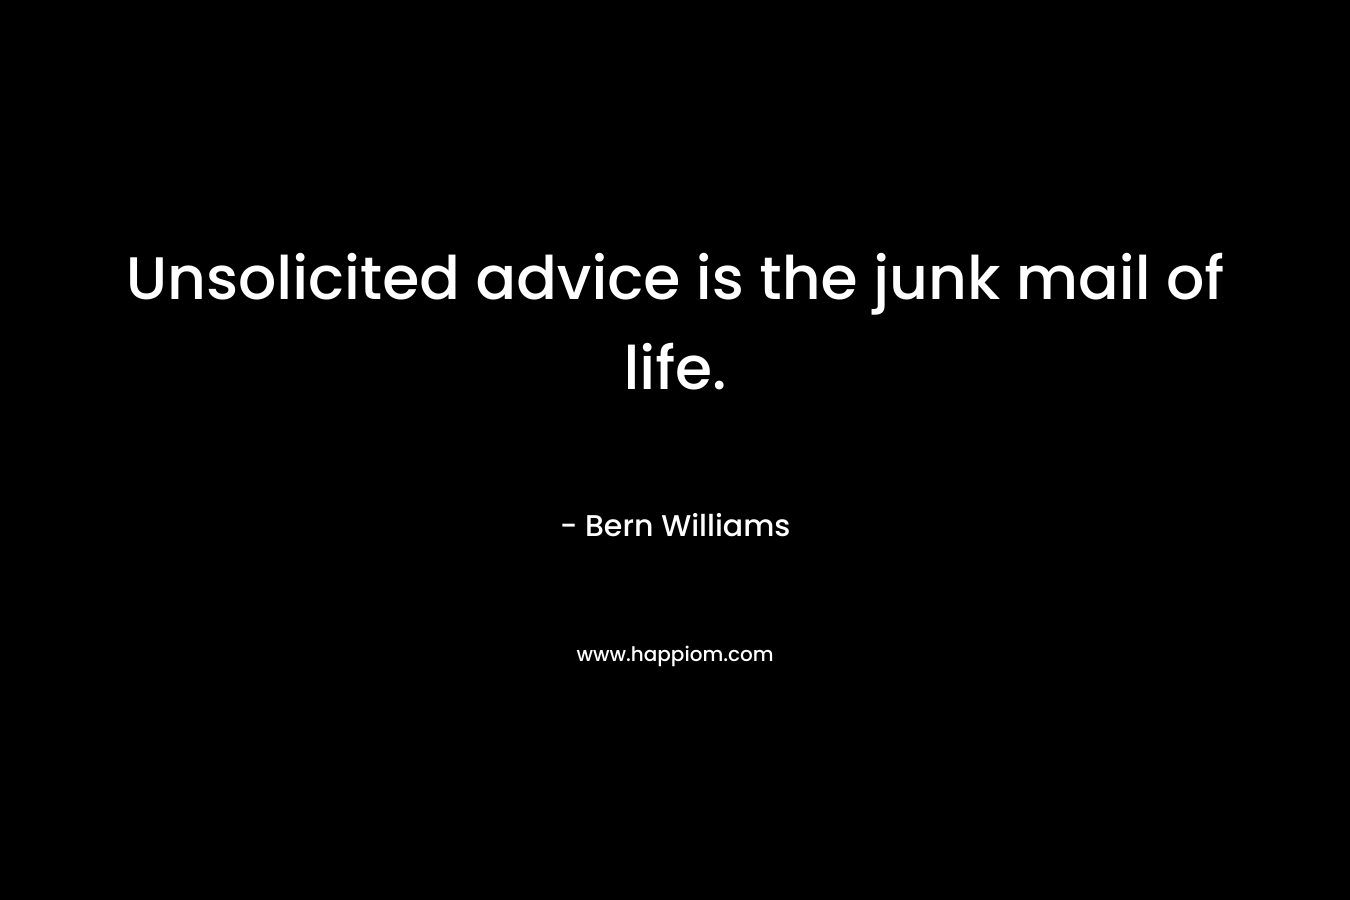 Unsolicited advice is the junk mail of life. – Bern Williams